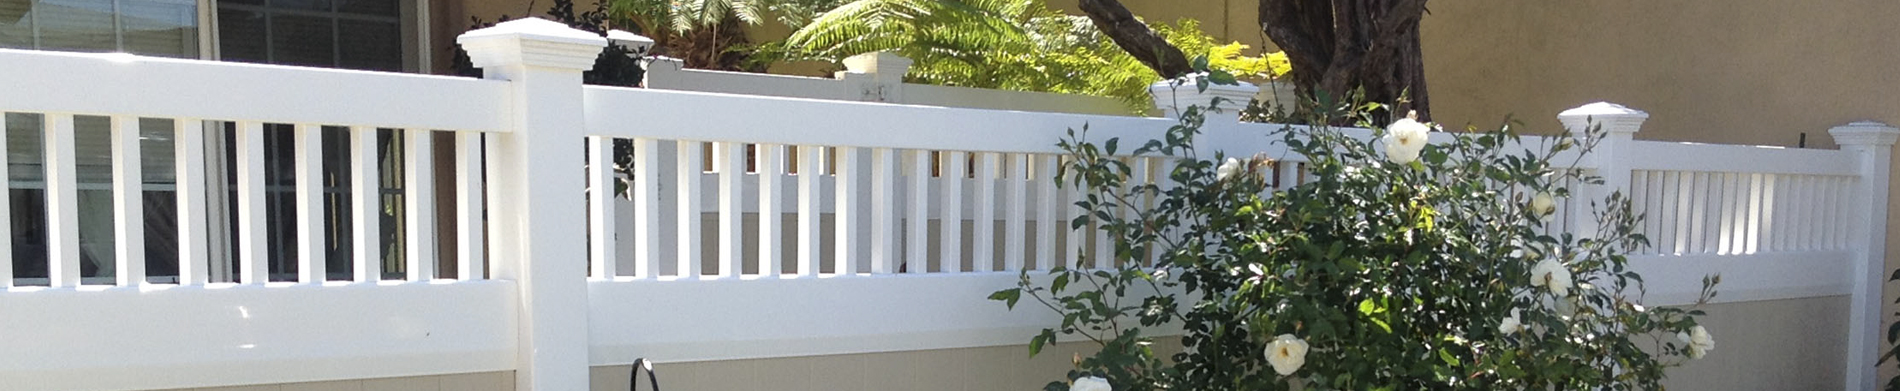 Privacy fence panels from Duramax – The ultimate affordable vinyl fencing solution